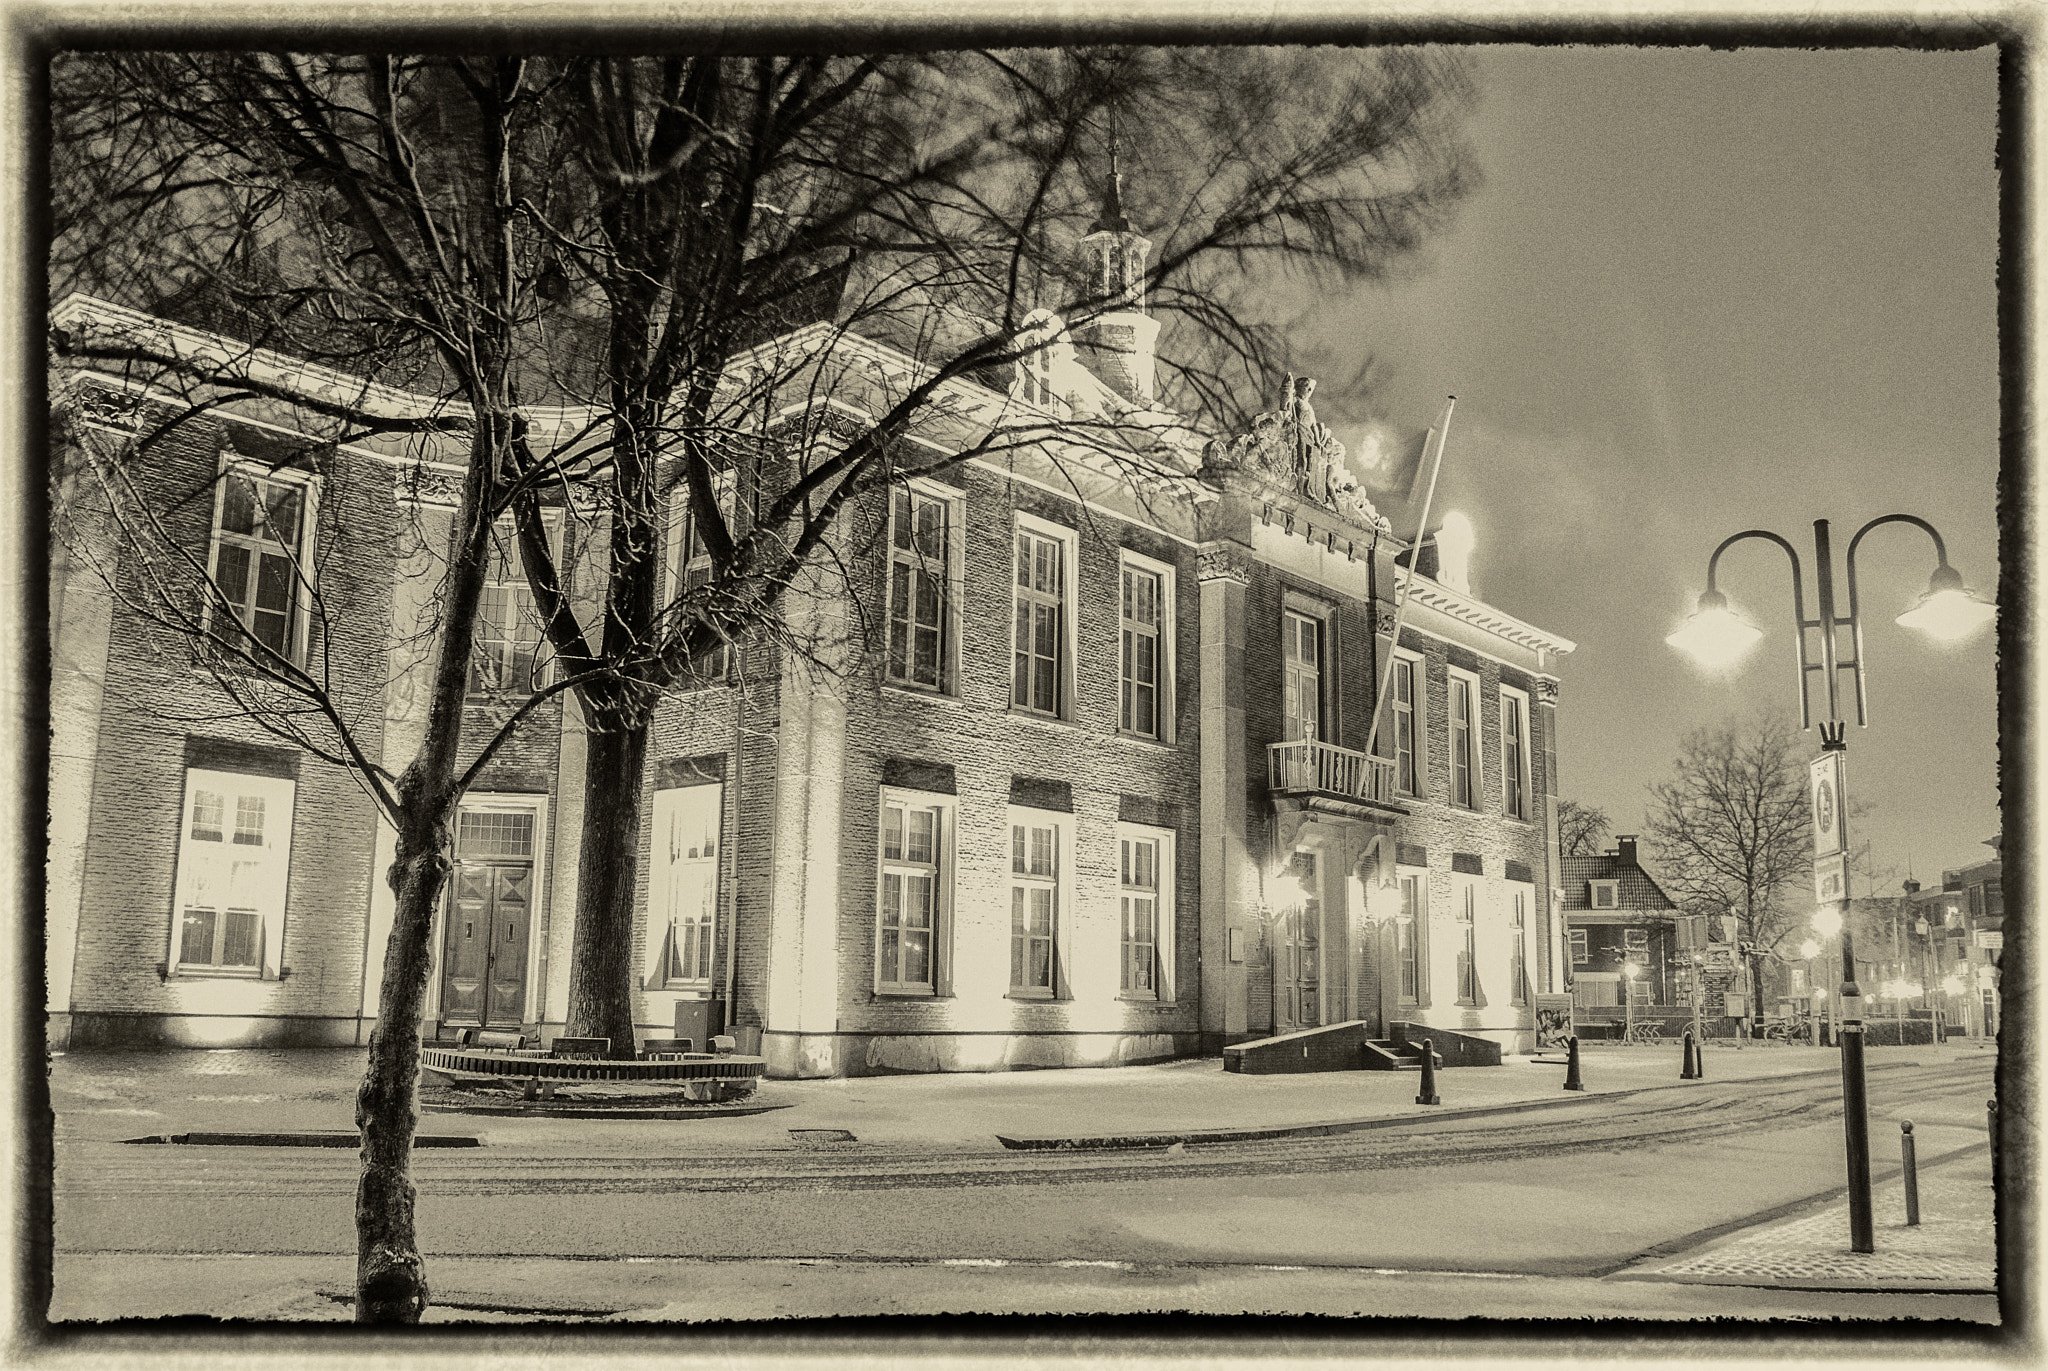 Nikon D200 sample photo. Library at night with fresh wet snow photography